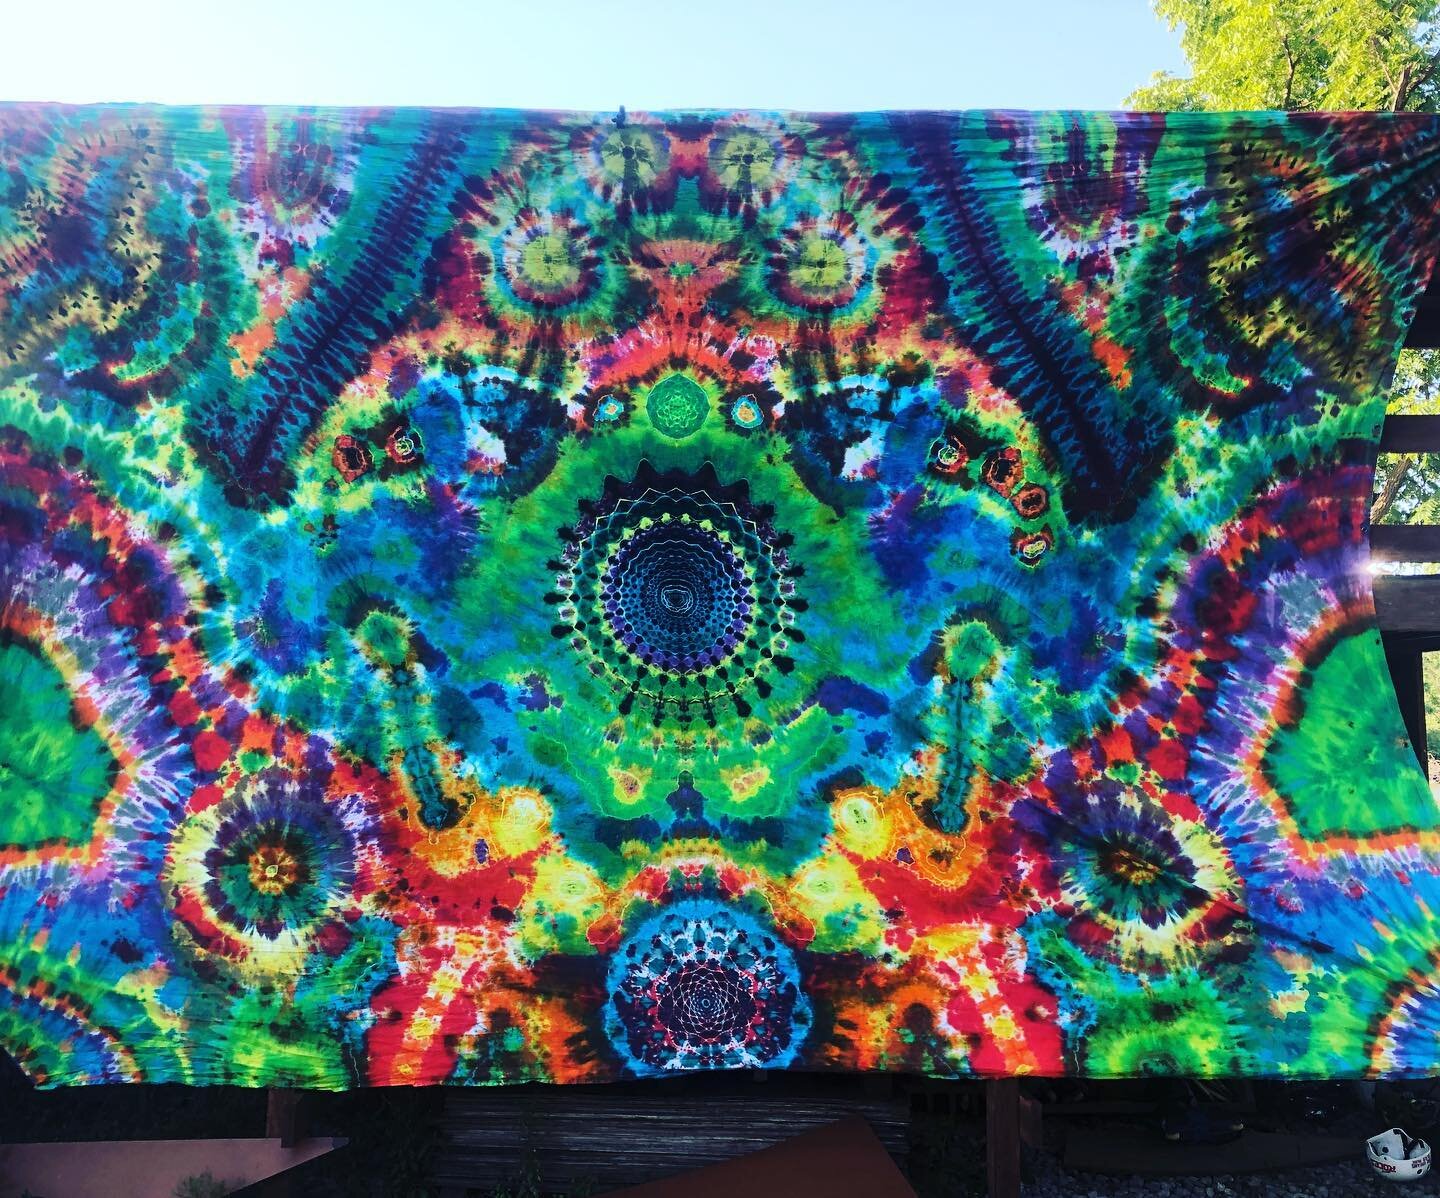 Big one for the boys of @hyrydermusic 18ft x 11ft. NFS #nfa #tiedyetapestry #tiedye #tiedyeisart #tiedyelove #tiedyed